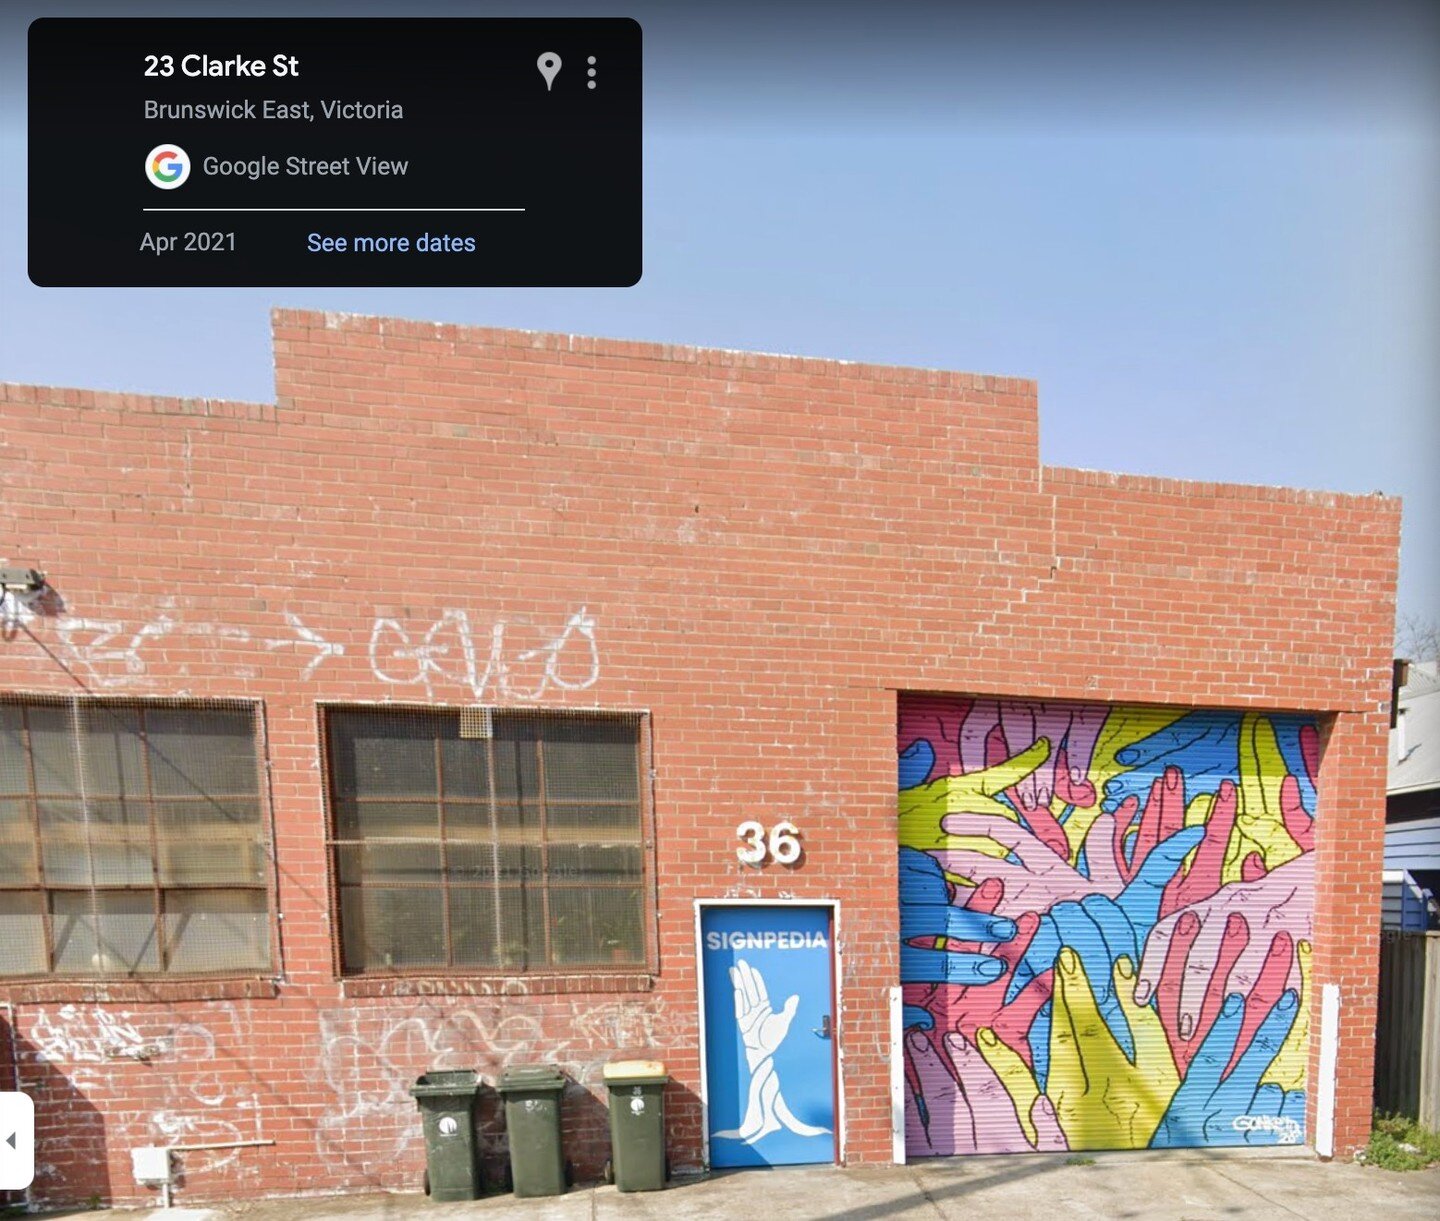 Awesome! 

My mural is now seeable on Google maps! 
Its 36 Clarke St, Brunswick East. 
Commissioned for Signpedia, in 2020.